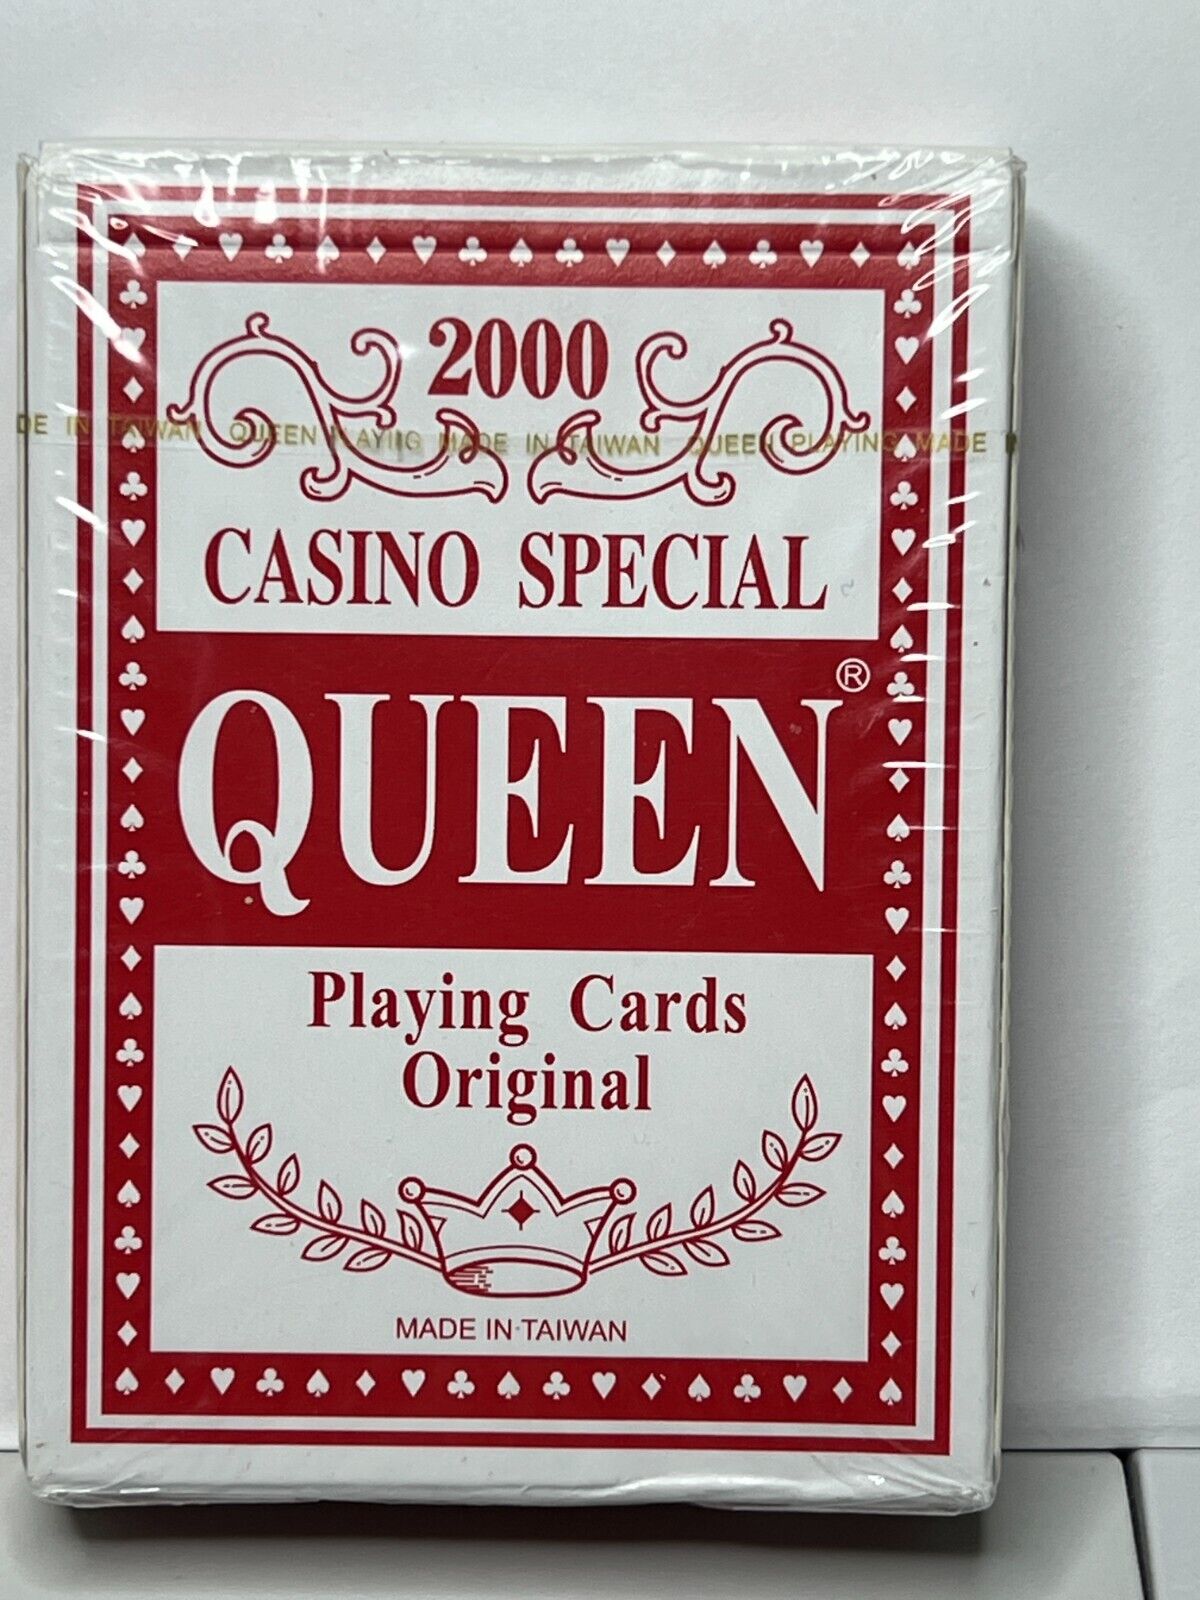 Casino Special 2000 Queen - Playing Cards - Opened